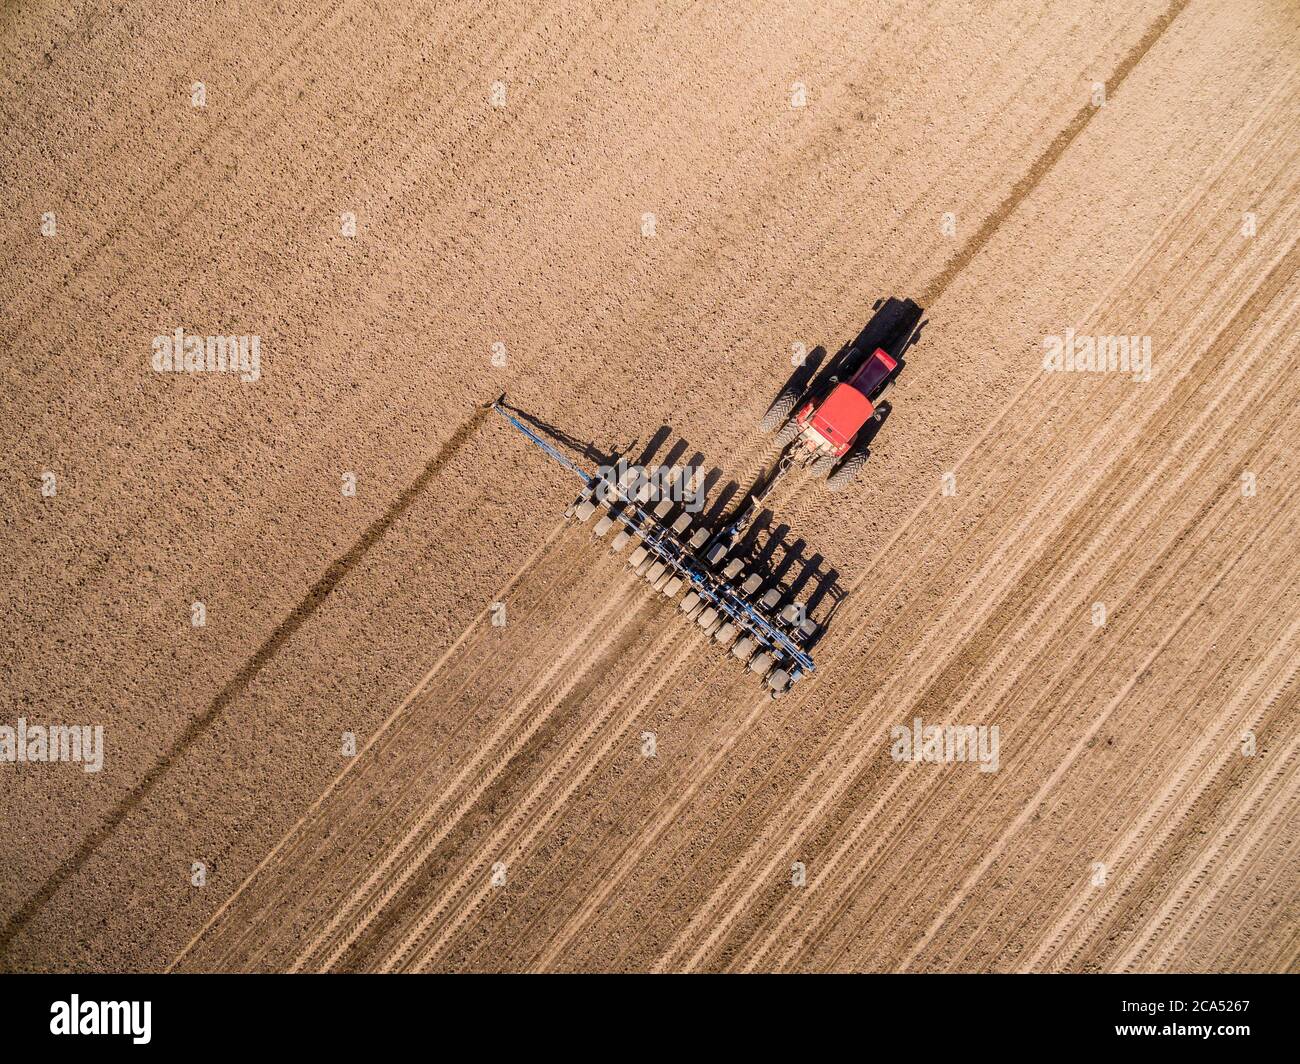 View of tractor on corn field, Marion Co., Illinois, USA Stock Photo